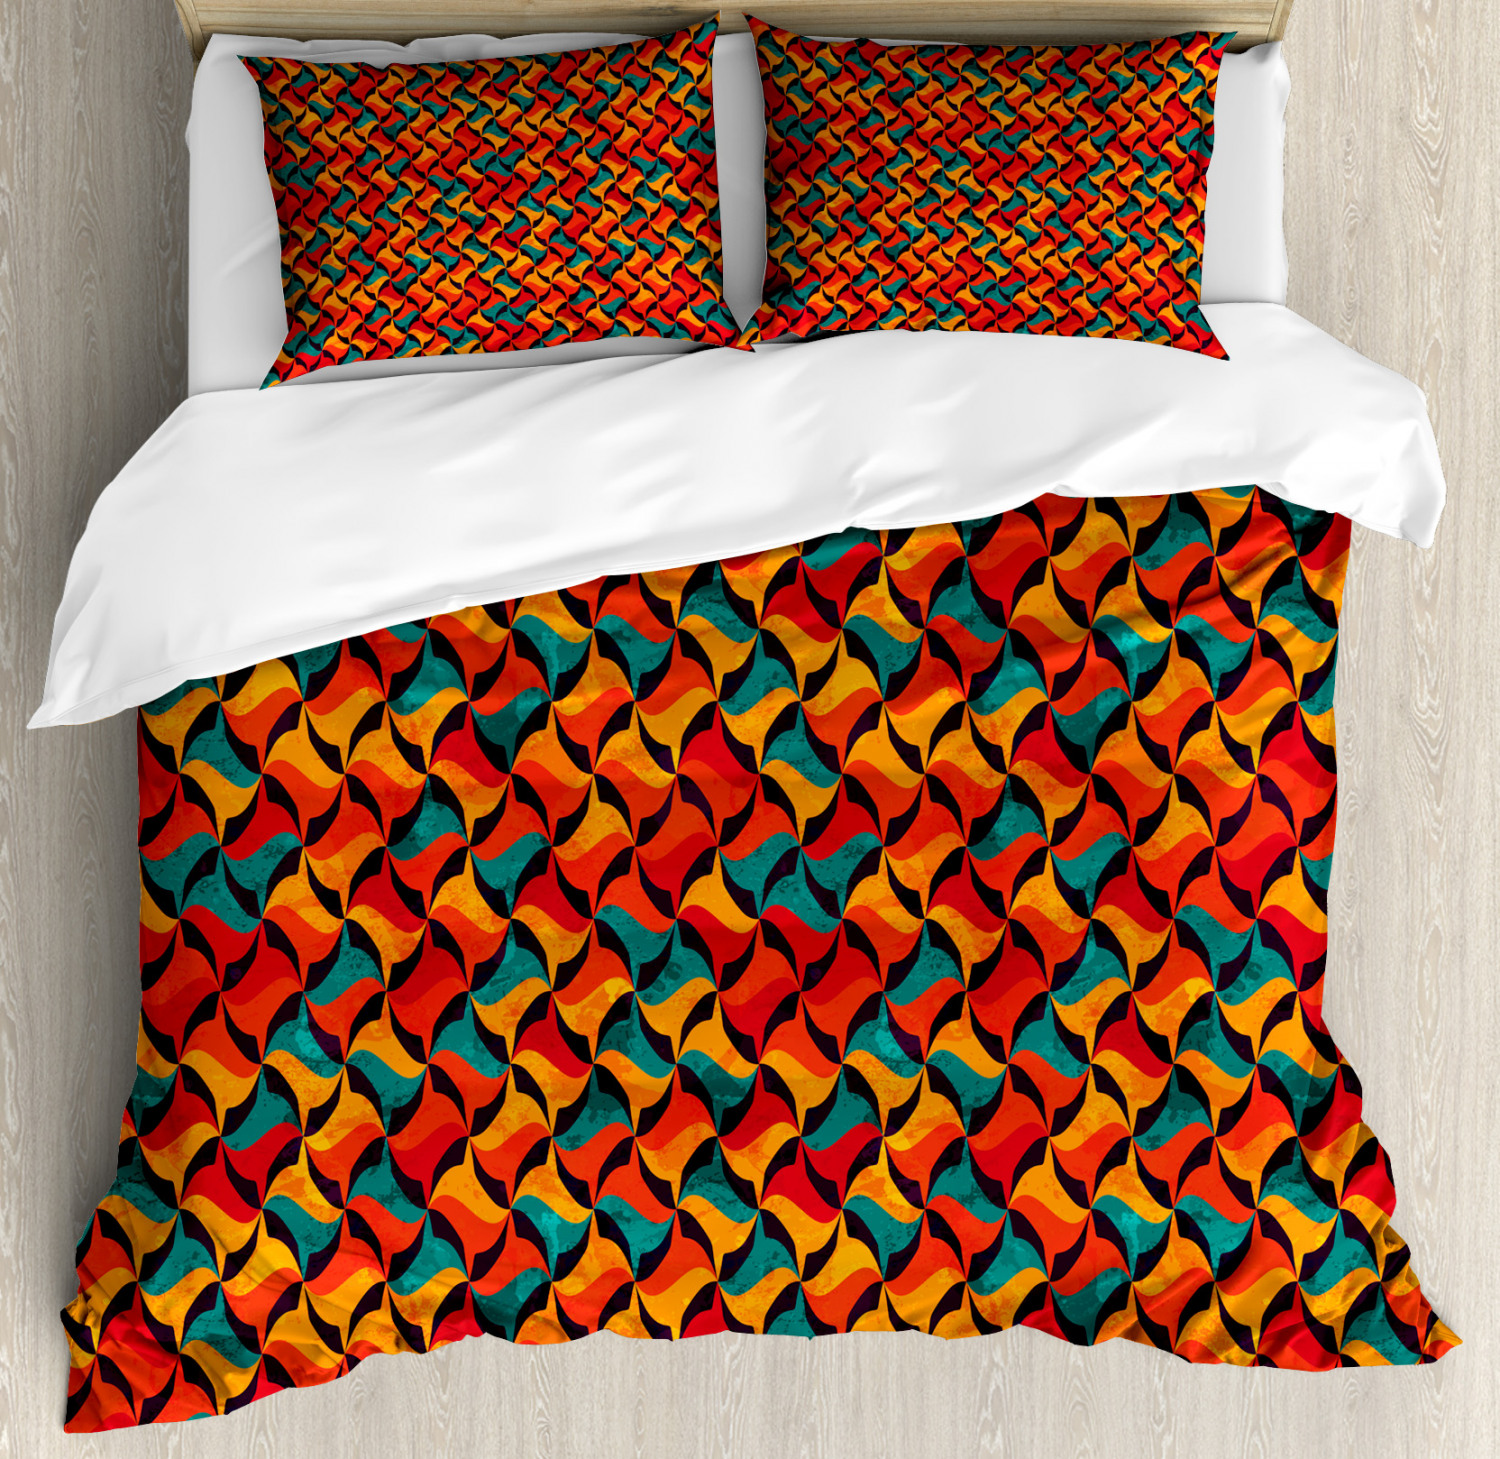 Geometric Duvet Cover Set With Pillow Shams Abstract Funky